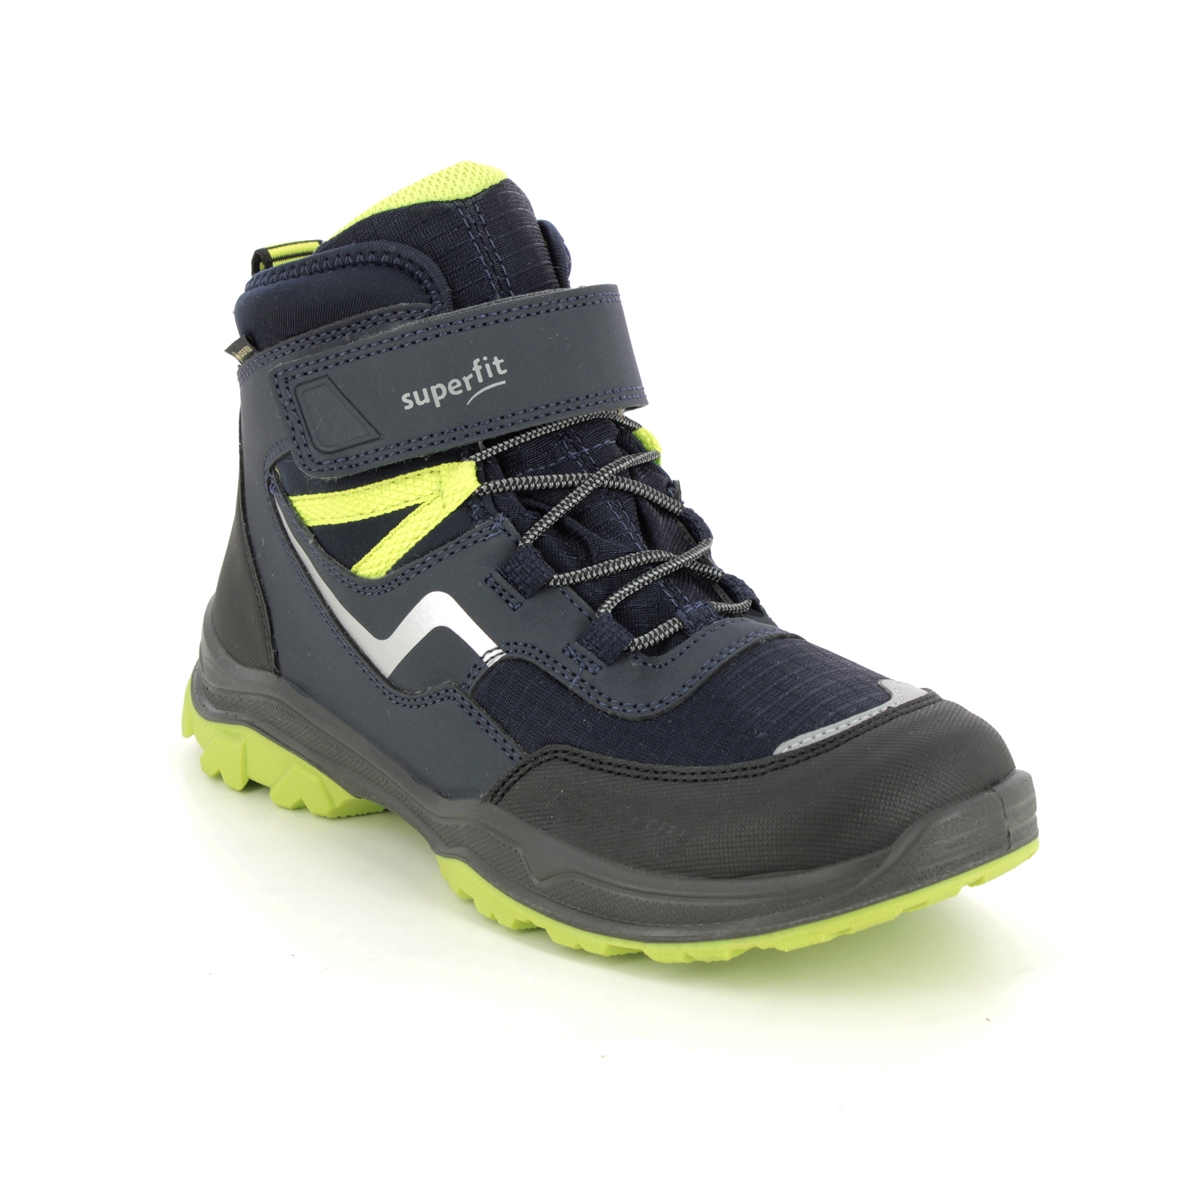 Superfit Jupiter Bungee Gtx Navy Lime Kids Boys Boots 1000074-8000 In Size 34 In Plain Navy Lime For kids